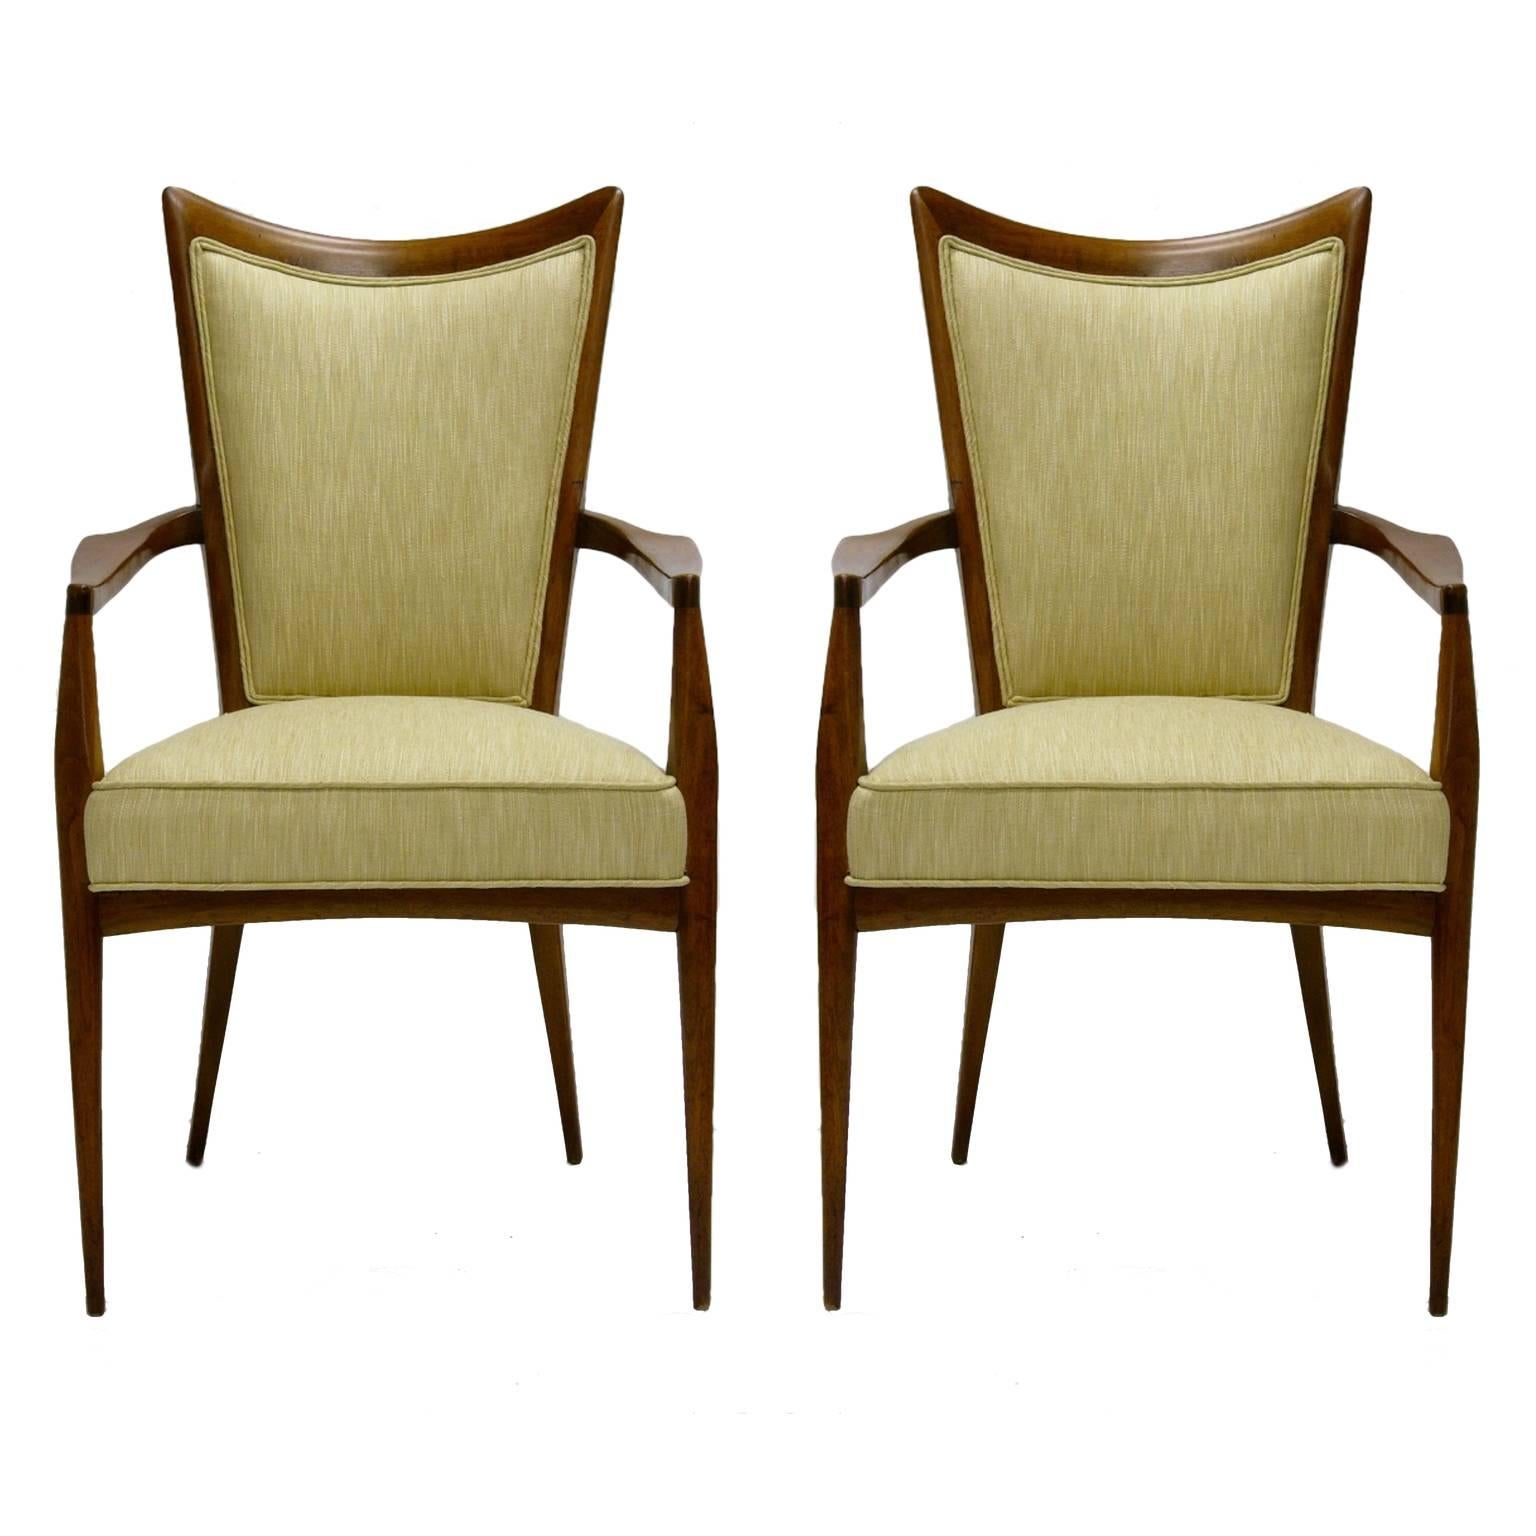 Stunning Pair of Sculptural Mahogany and Silk Chairs by Melchiorre Bega